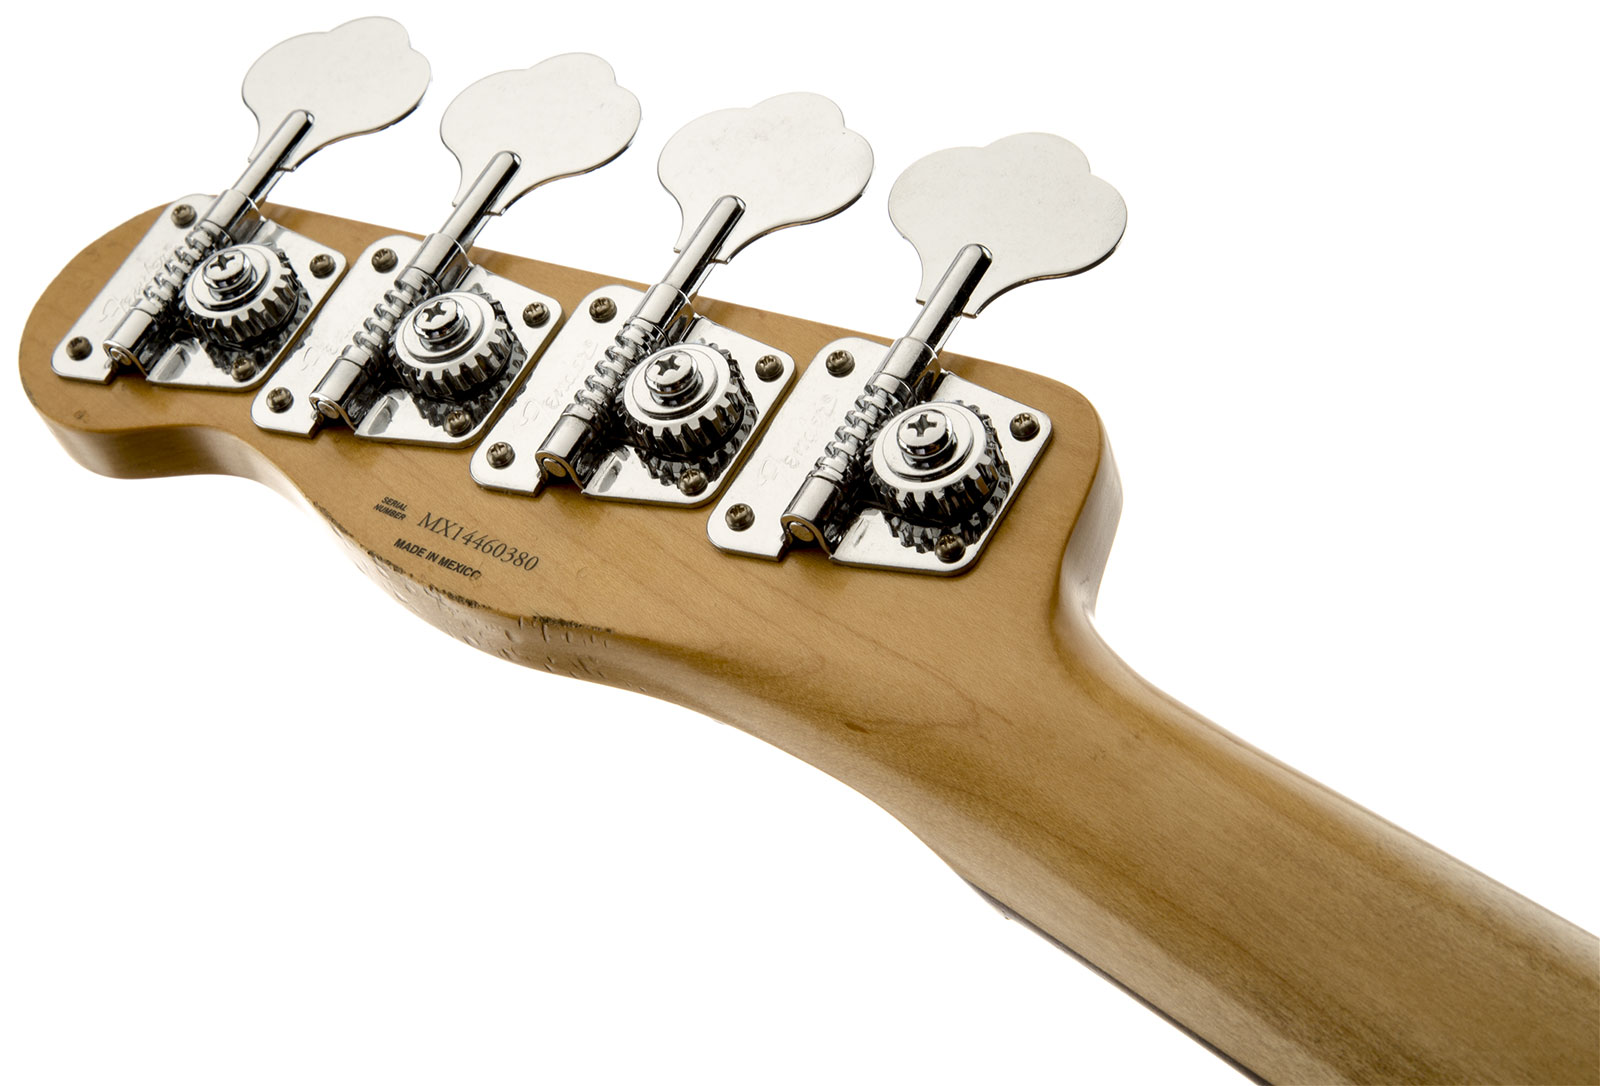 Fender Mike Dirnt Precision Bass Mex Signature Rw - White Blonde - Solid body electric bass - Variation 3